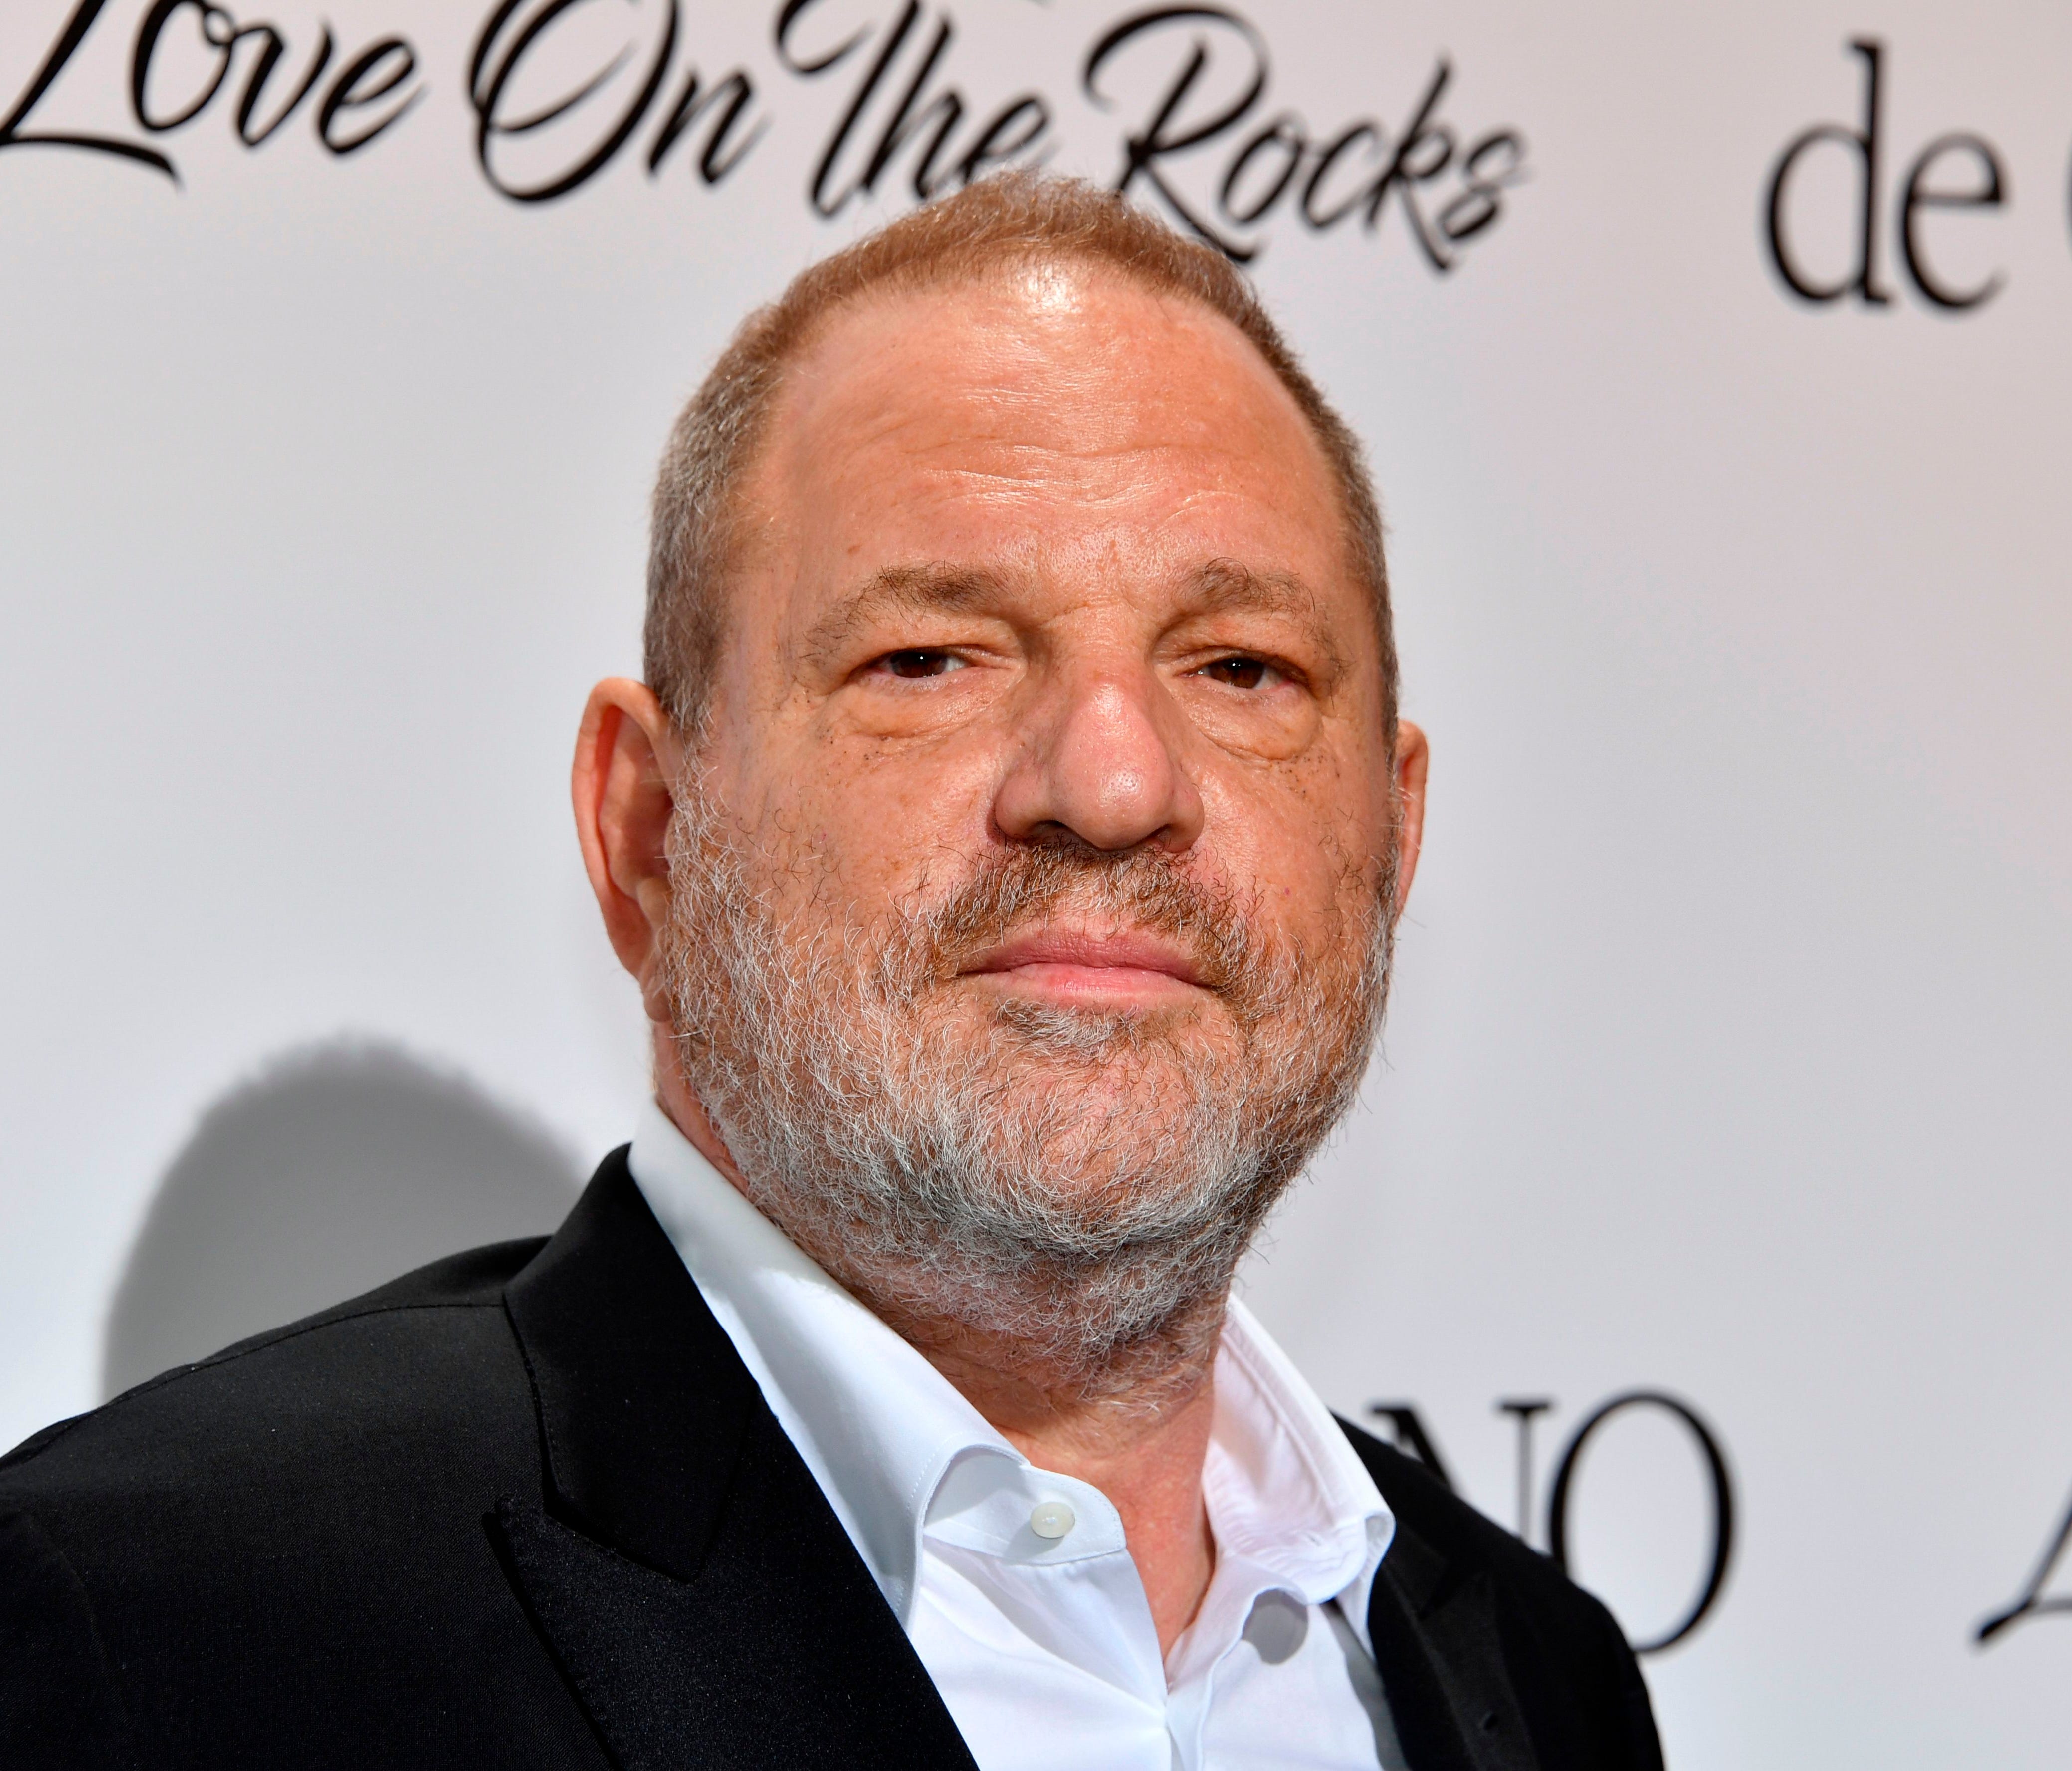 Harvey Weinstein was fired as co-chairman from The Weinstein Company on Sunday.